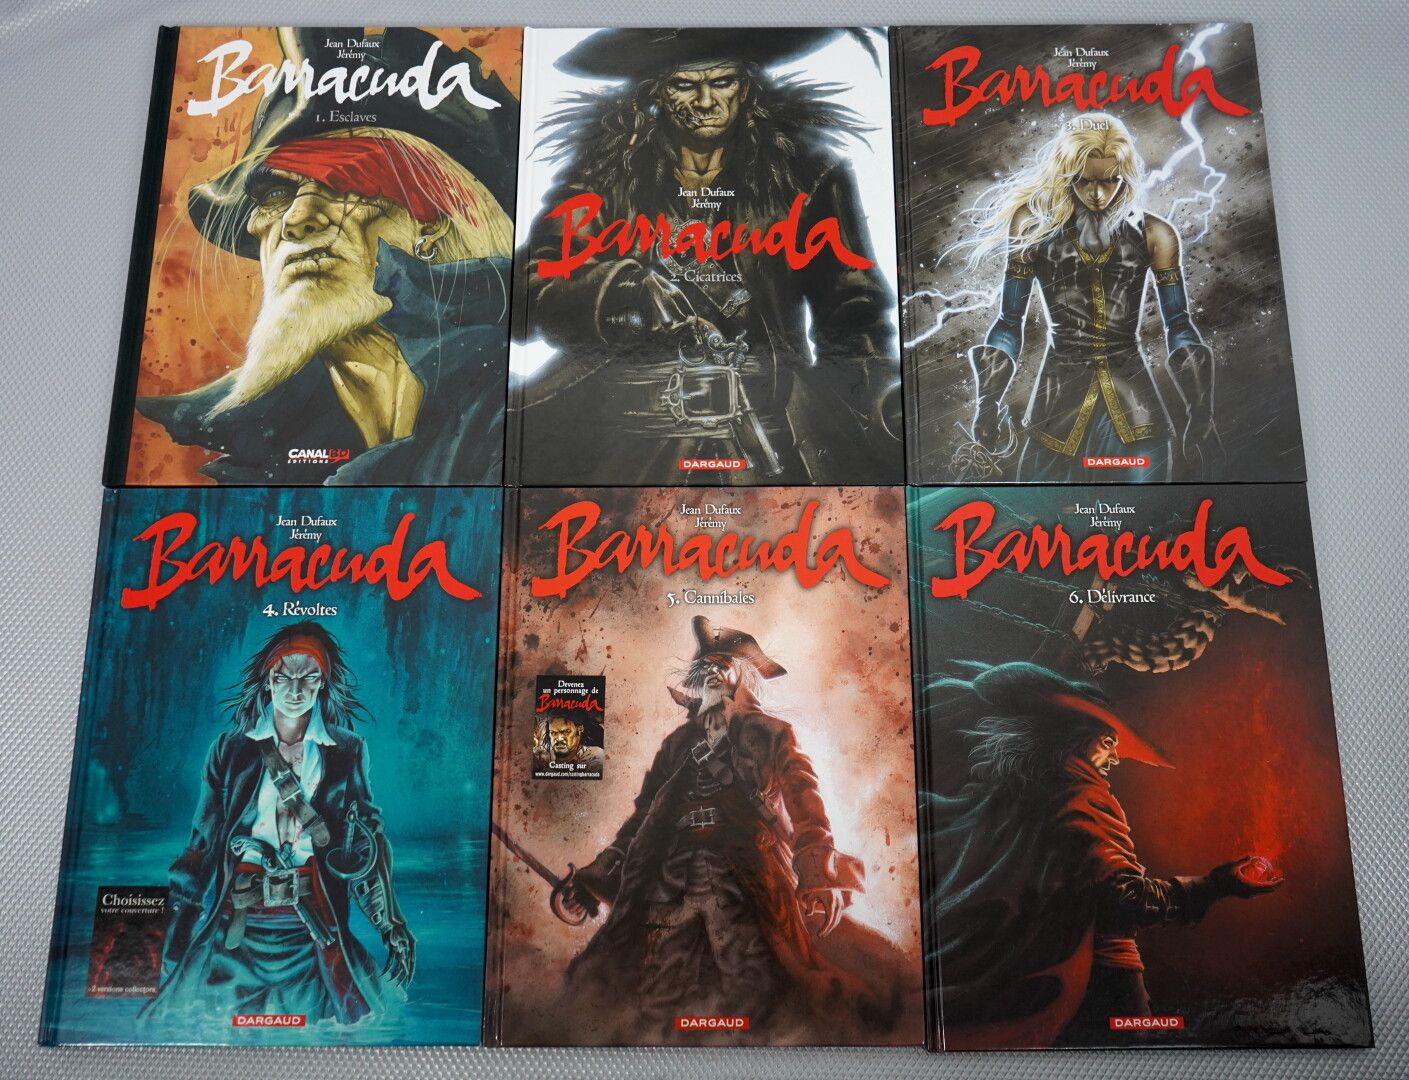 Null BARRACUDA (Dufaux and Jérémy). 6 volumes.



1 Slaves. EO 2010. Copy with a&hellip;